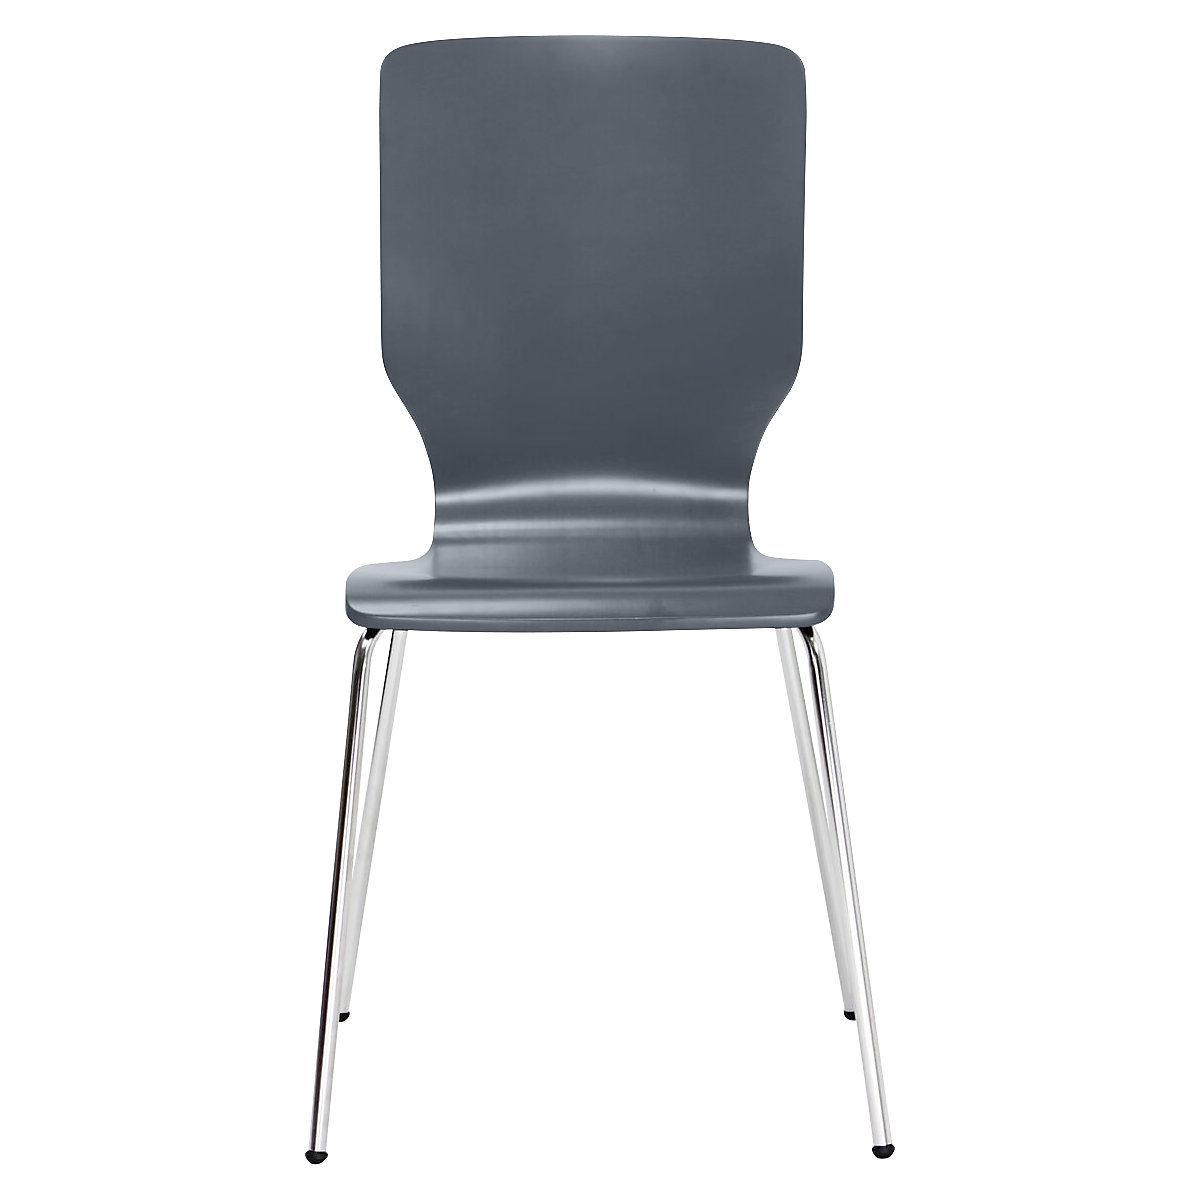 Wooden stacking chair, HxWxD 850 x 400 x 520 mm, pack of 4, seat in charcoal-9